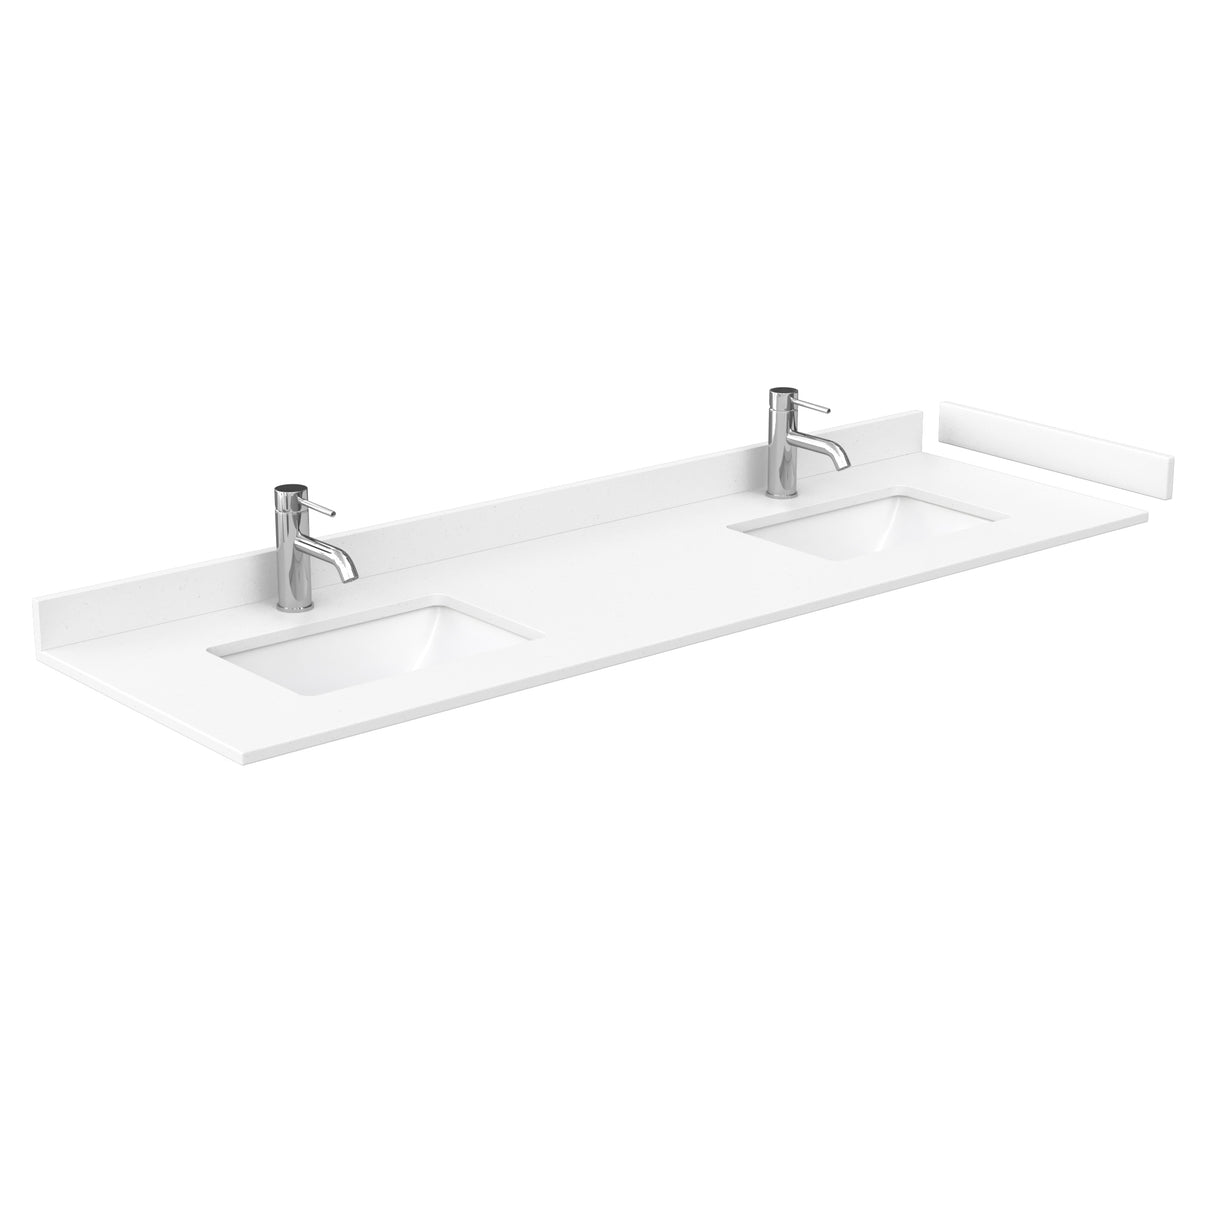 Sheffield 72 Inch Double Bathroom Vanity in White White Cultured Marble Countertop Undermount Square Sinks No Mirror